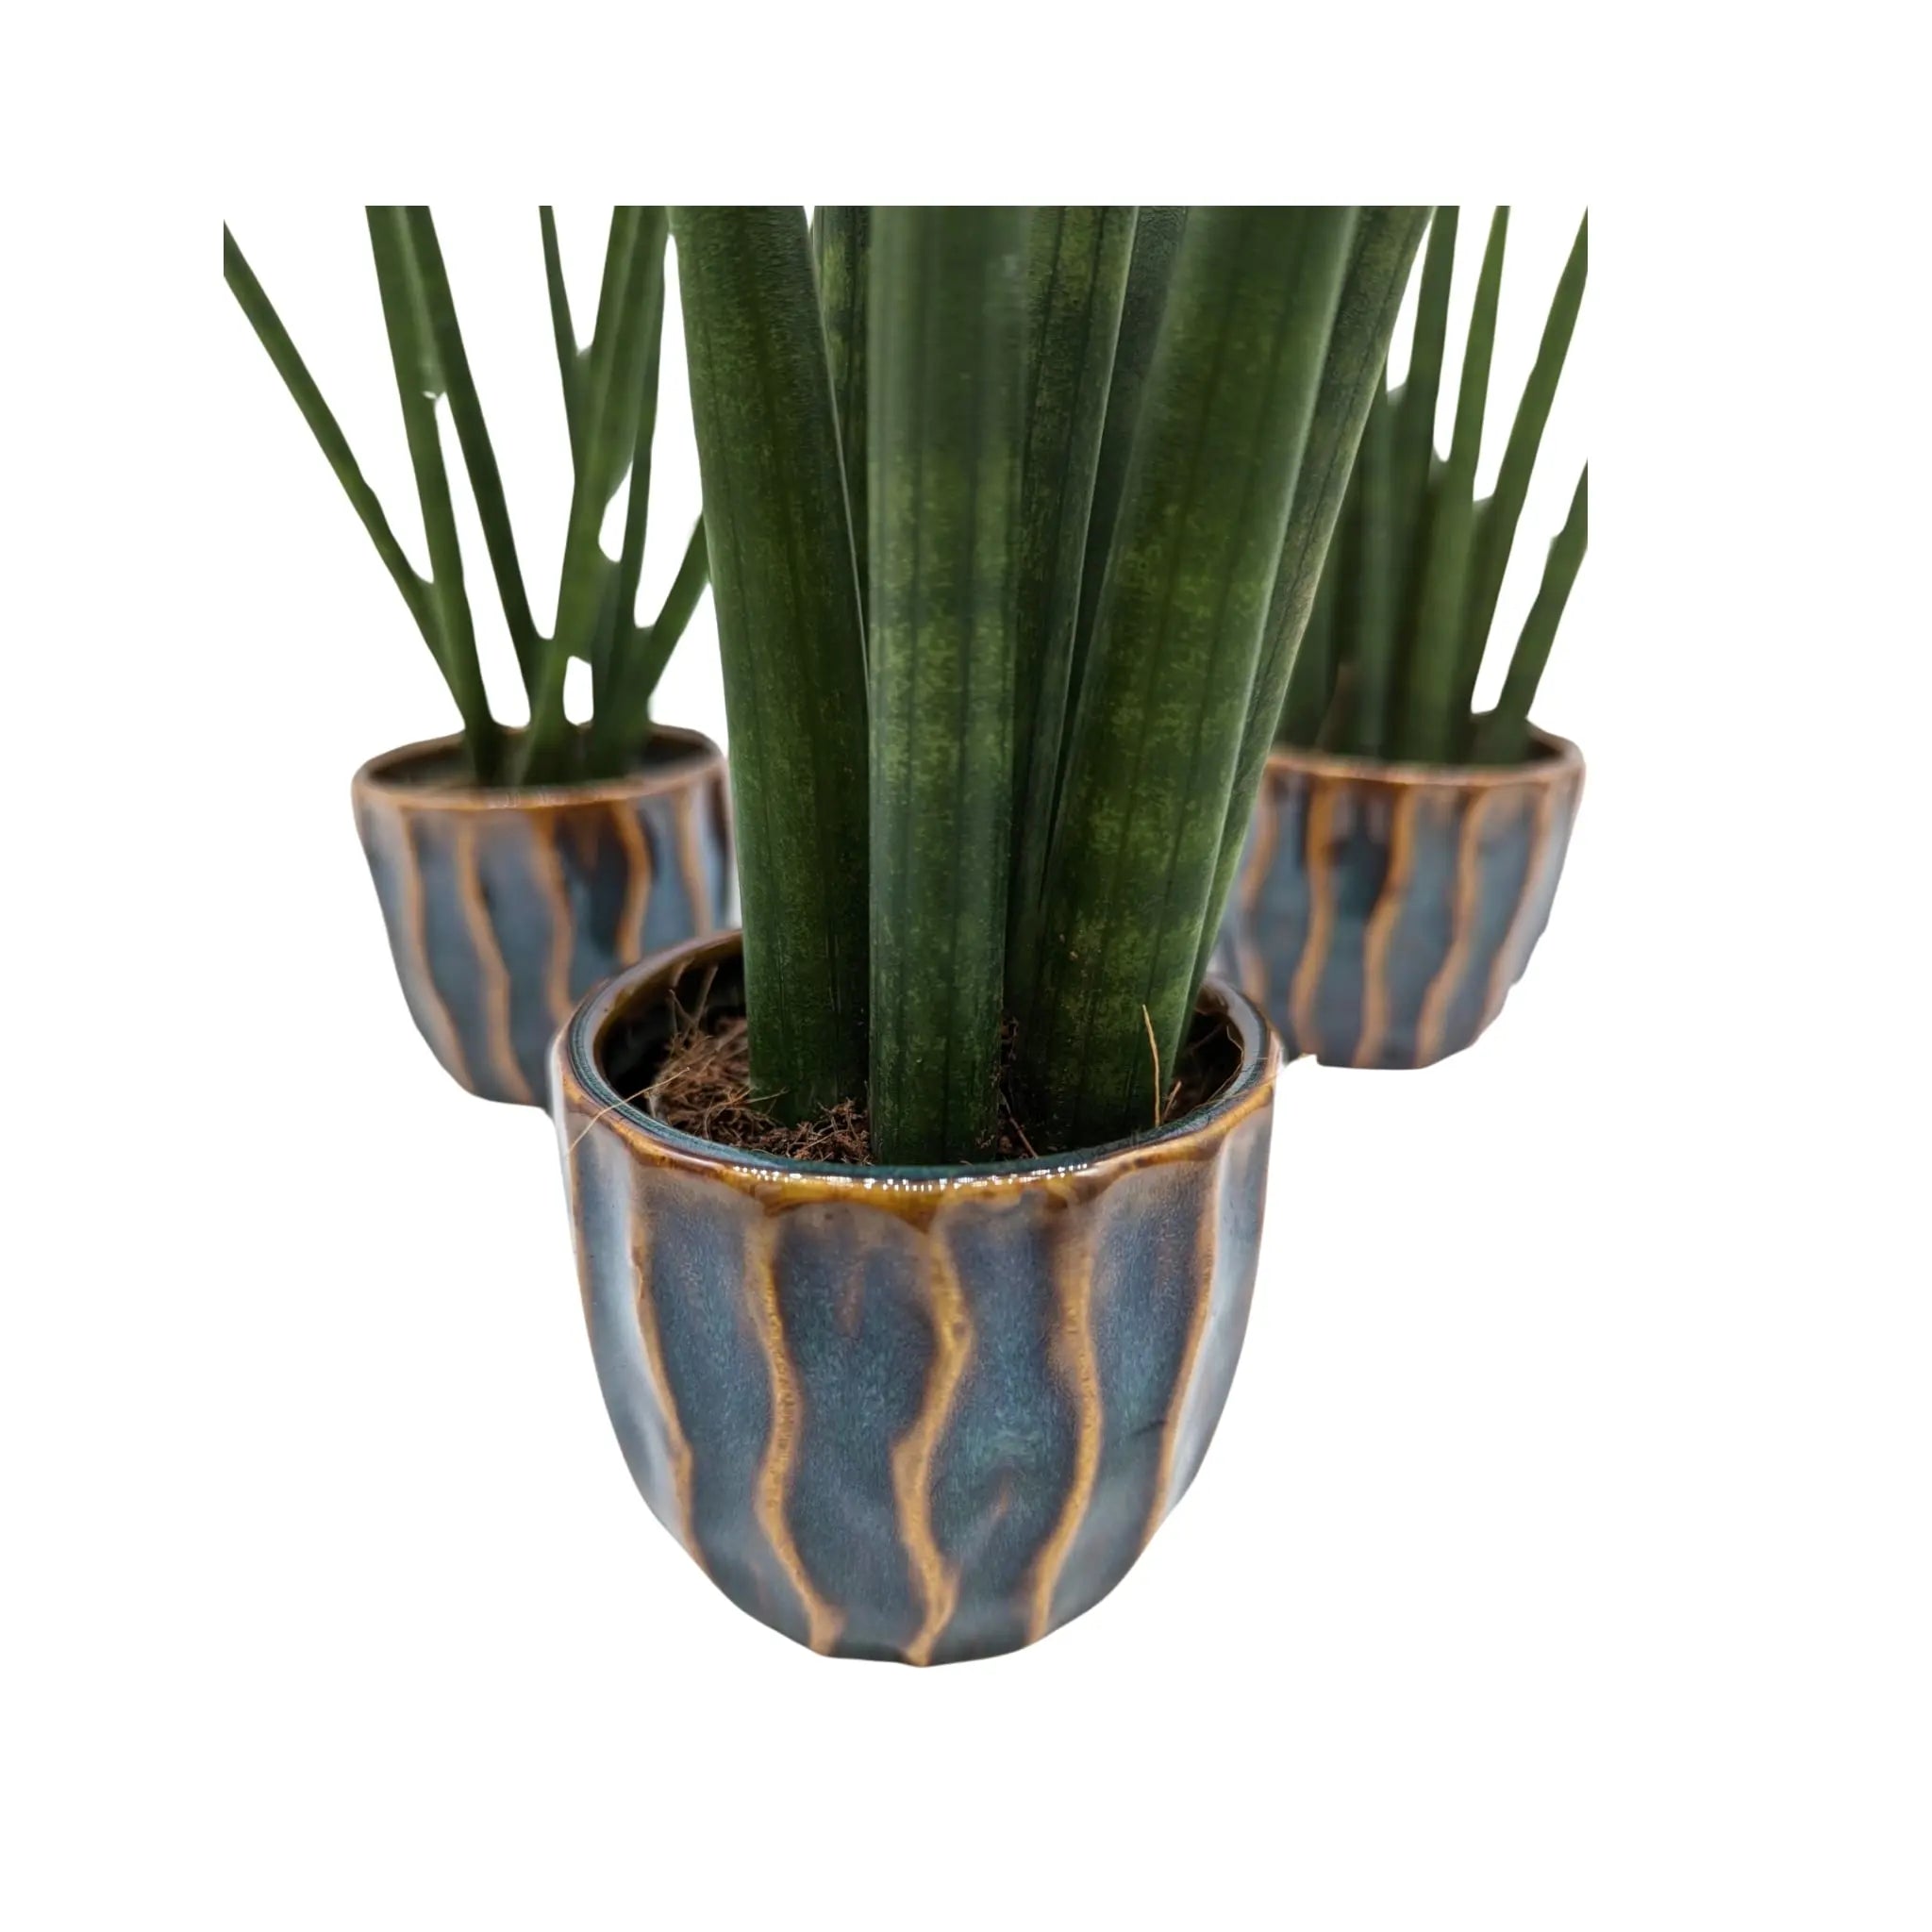 Sanseviera cylindrica in Decorative Pot - 18cm tall Leaf Culture